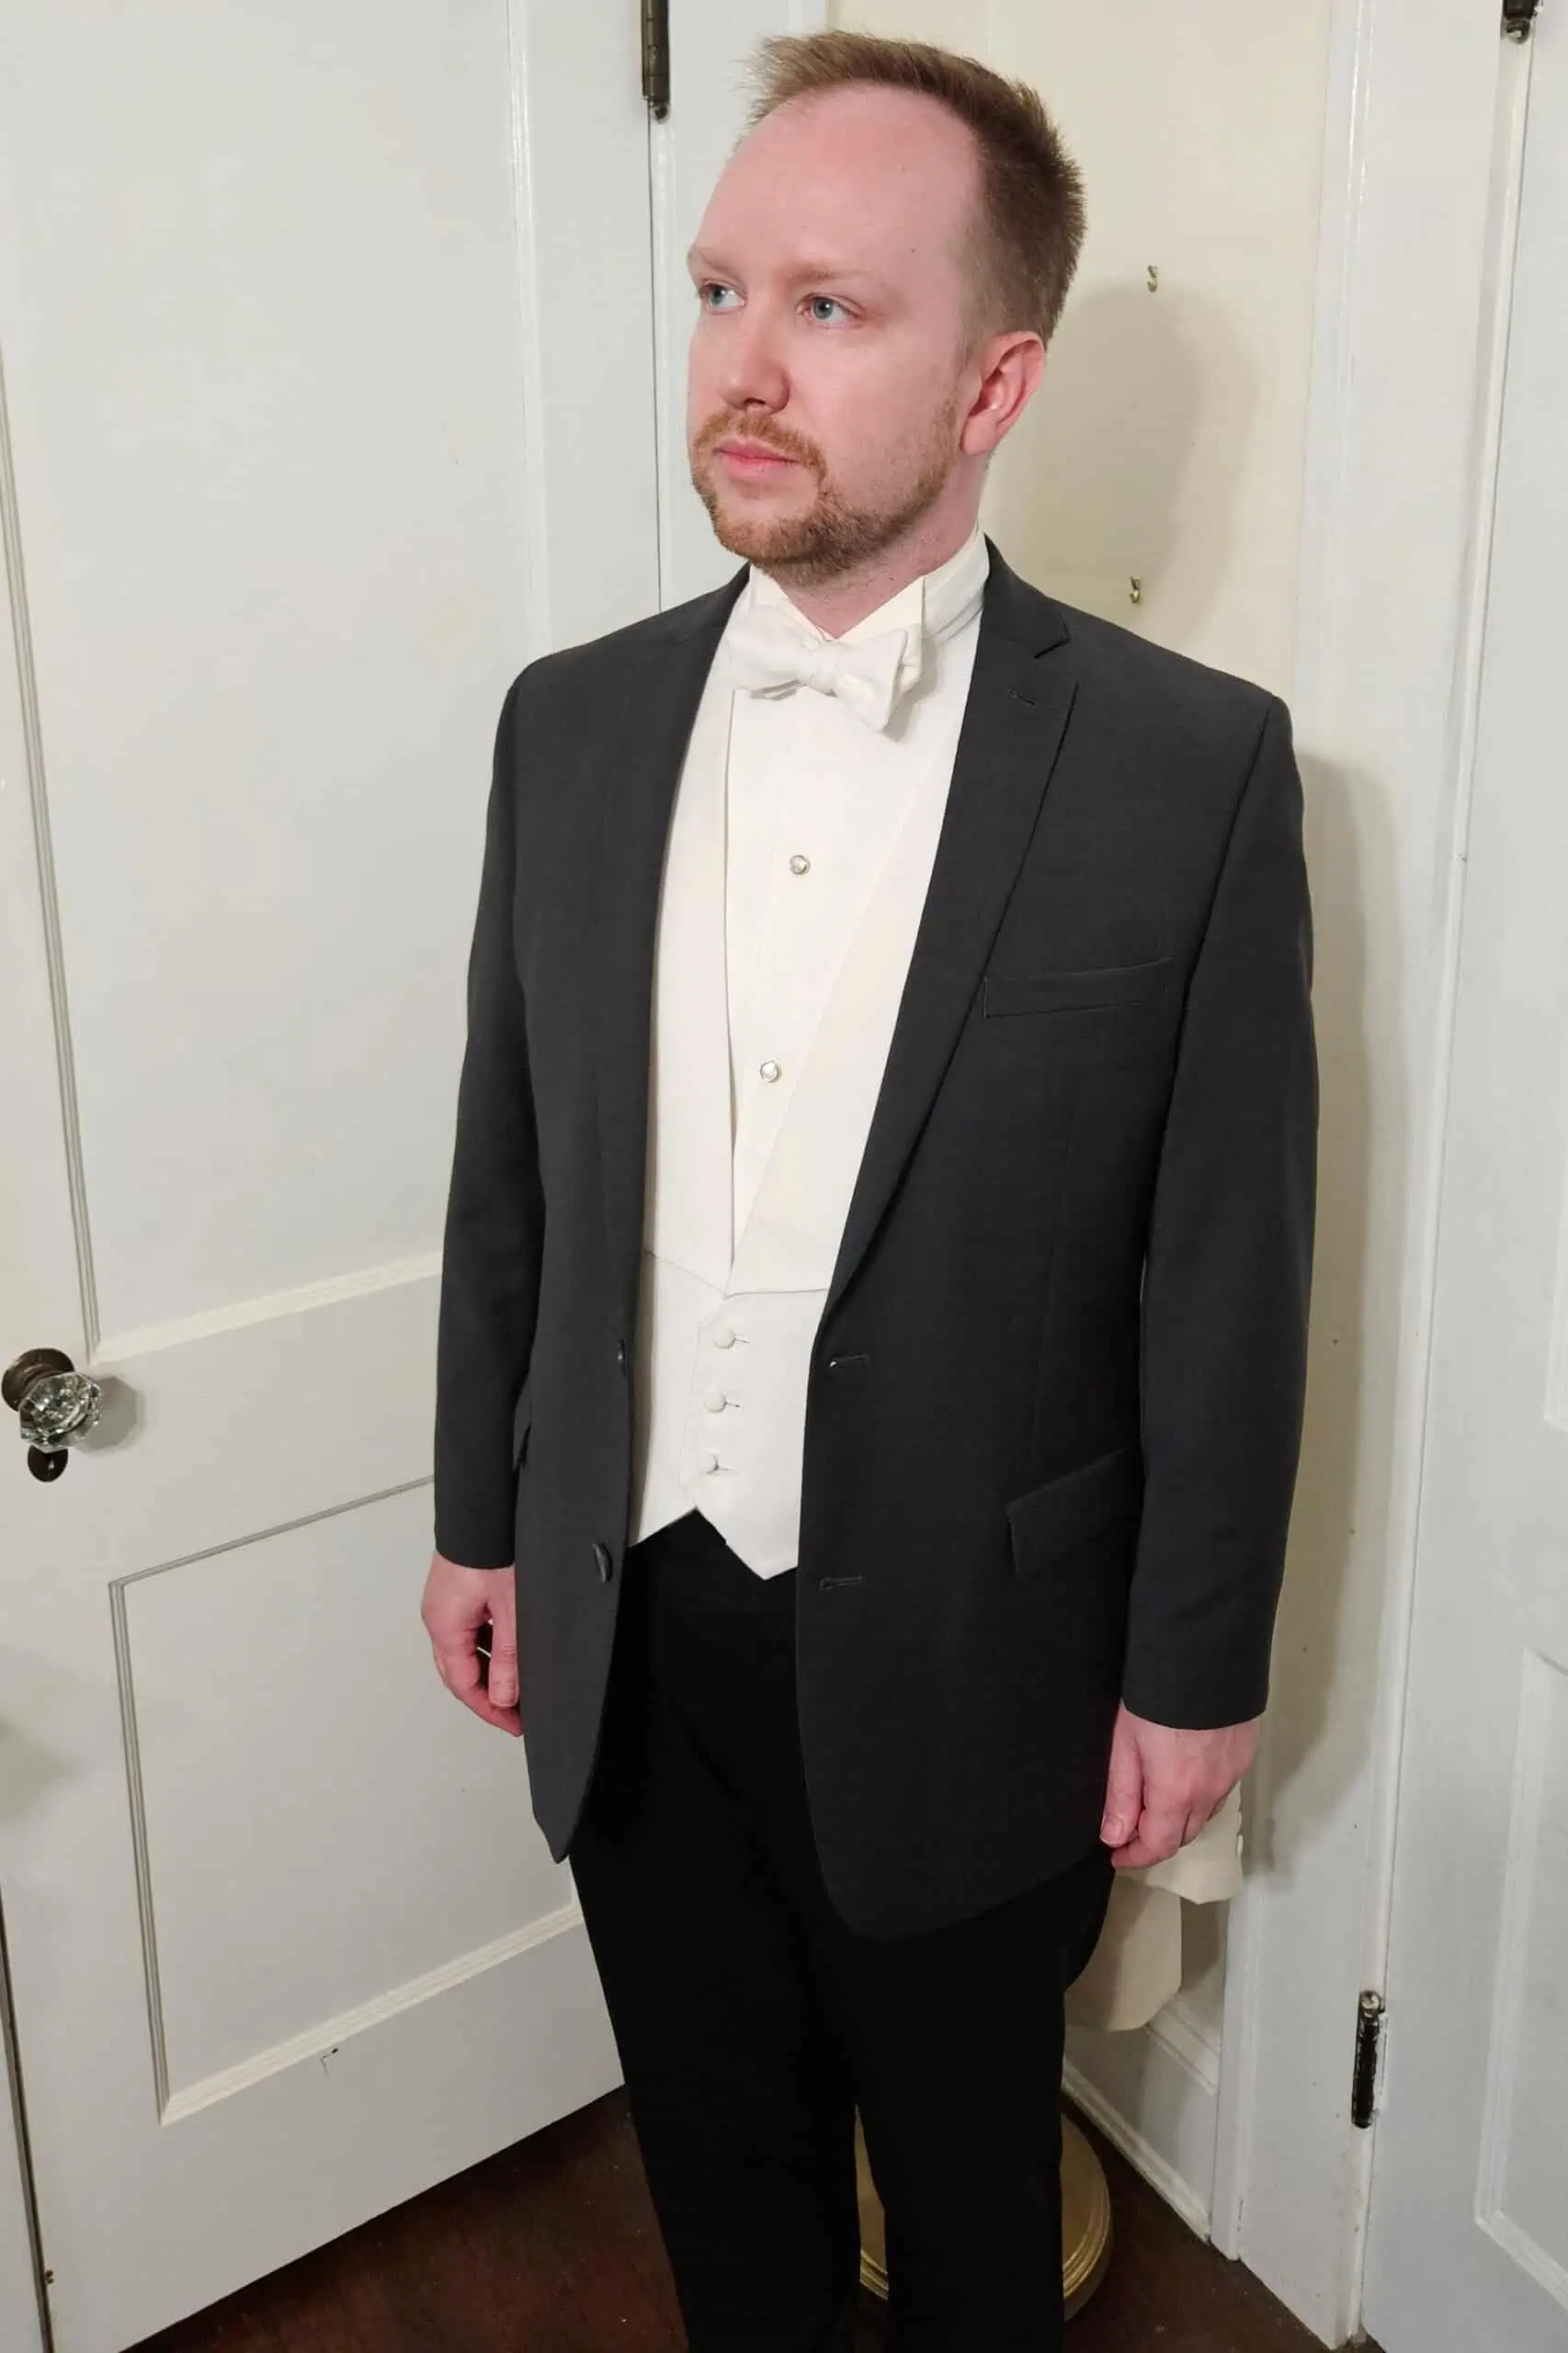 Photo of White Tie worn with a Day Suit